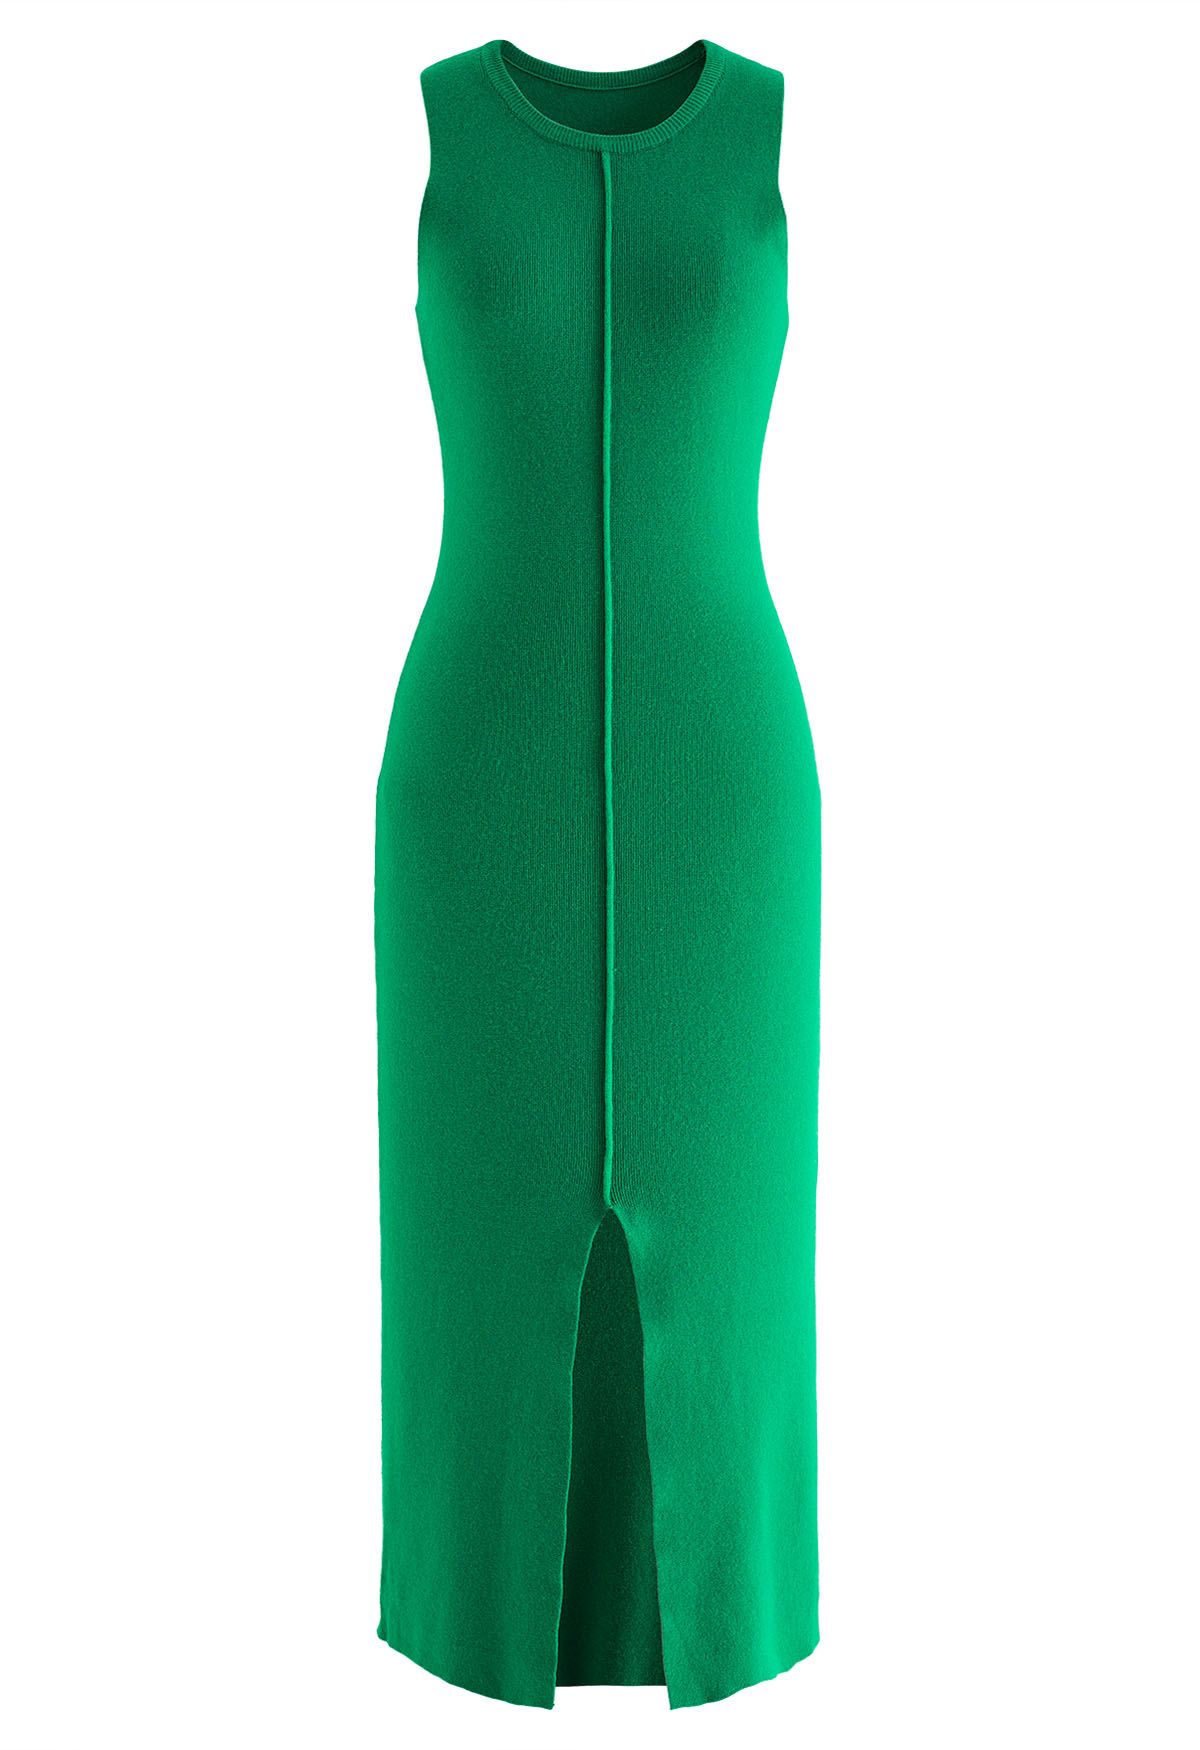 Front Slit Bodycon Knit Dress in Green